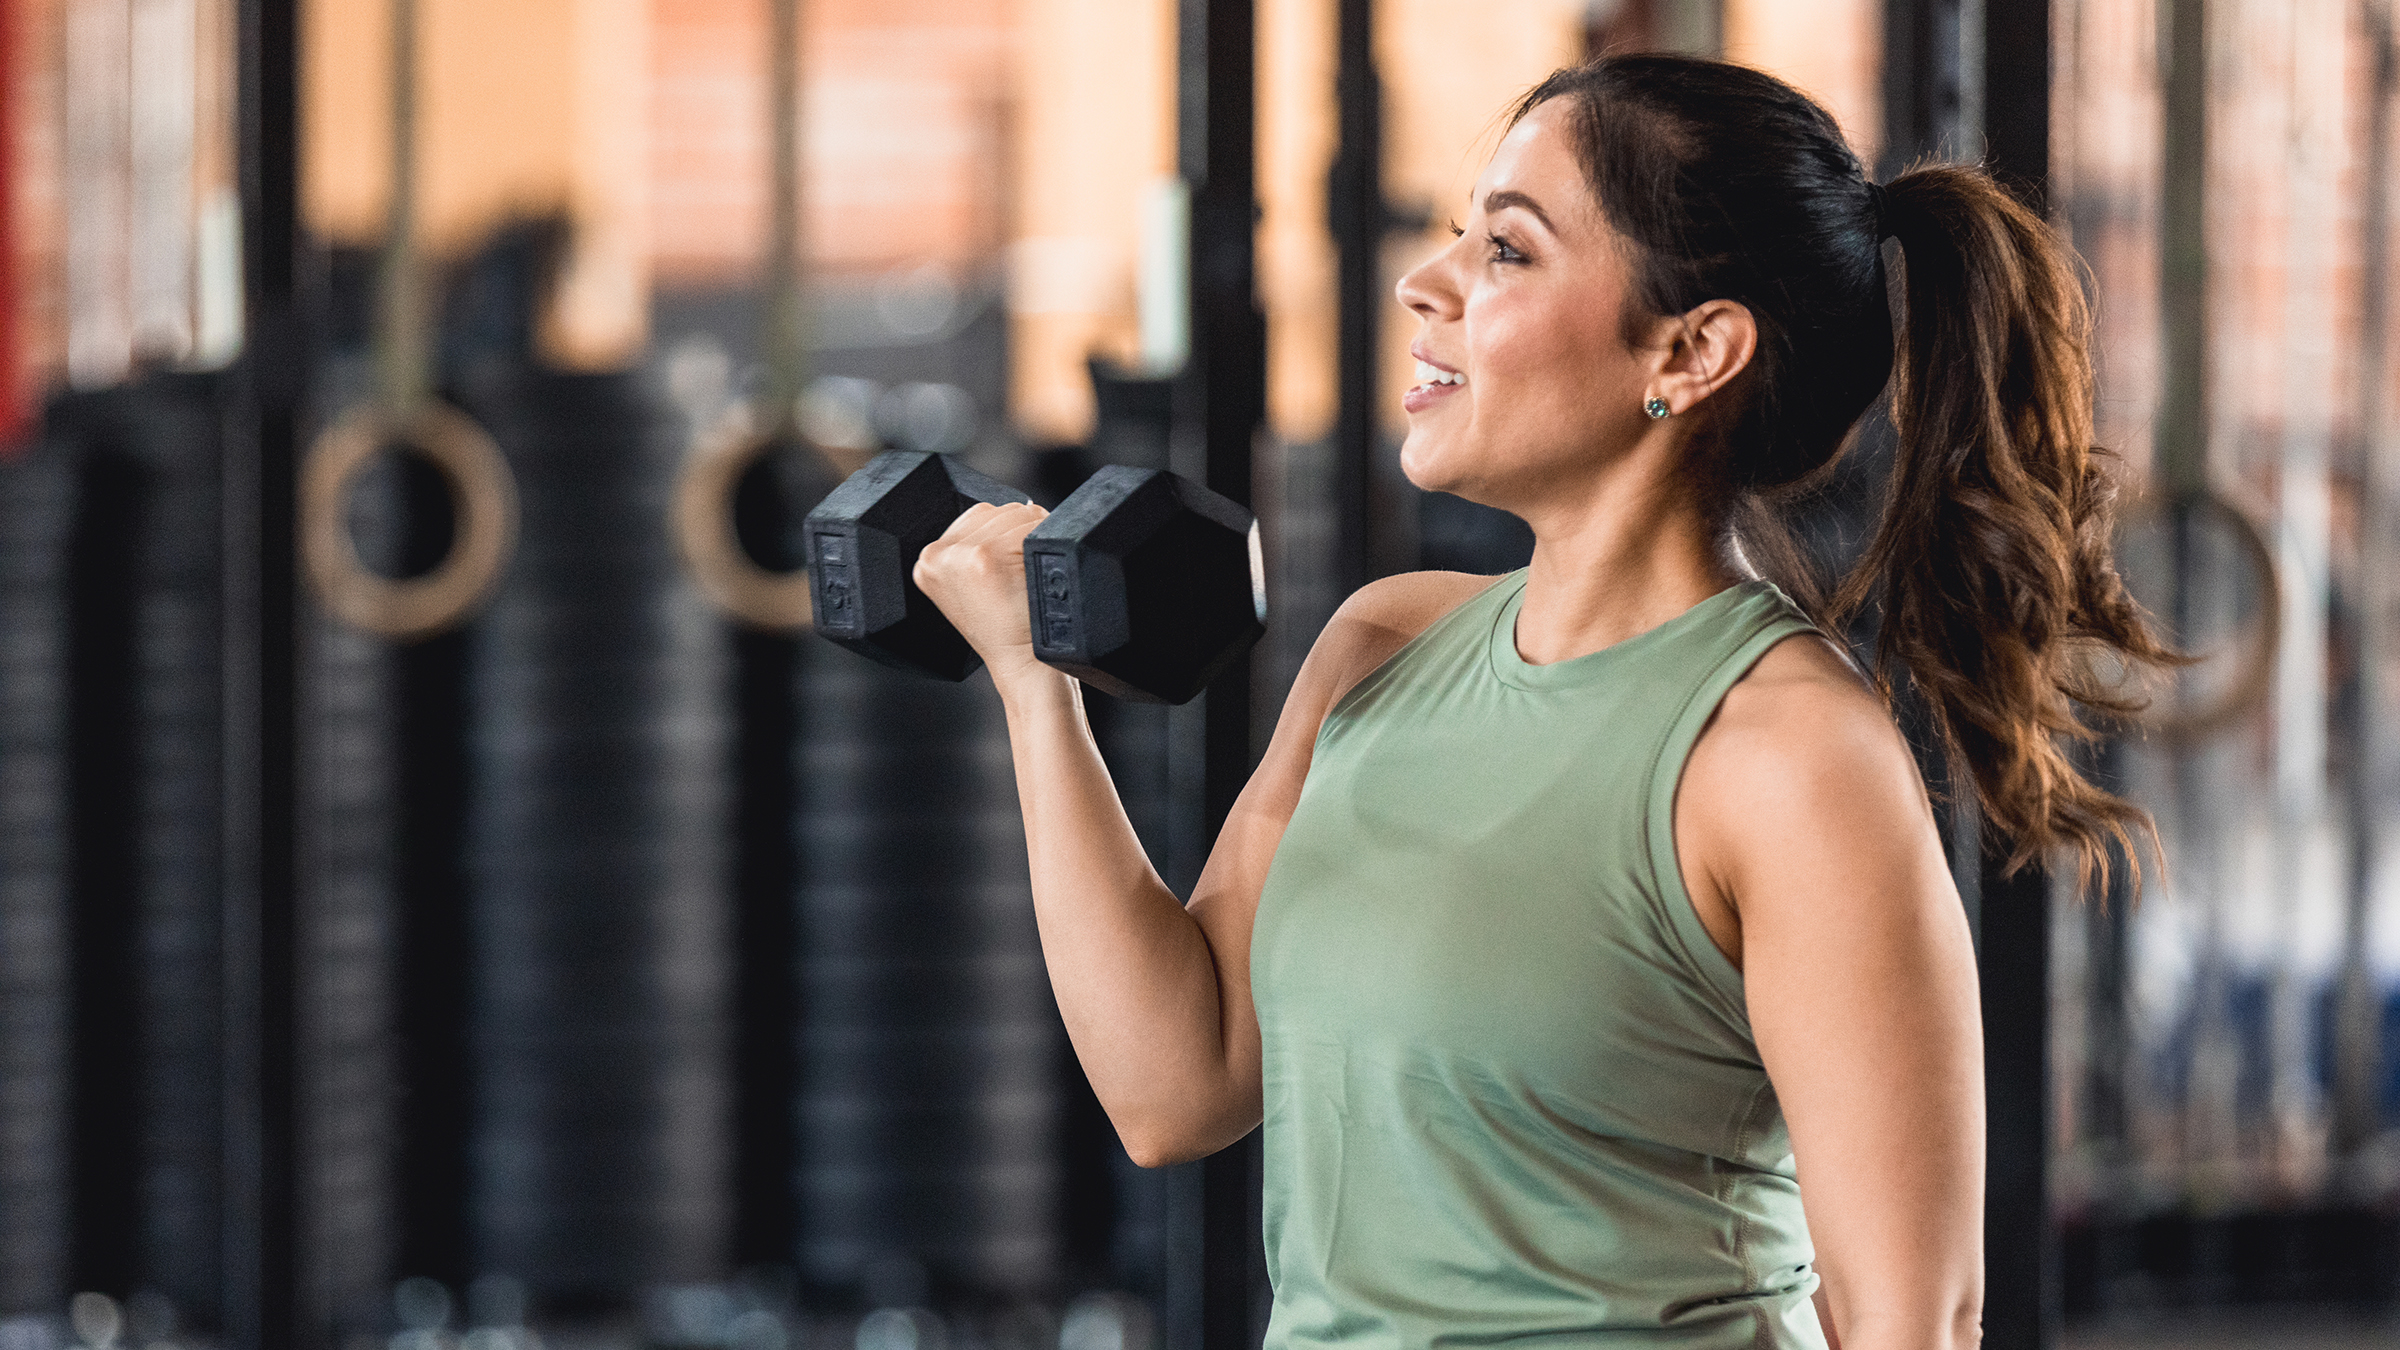 What Are the Biggest Benefits of Strength Training? - GoodRx